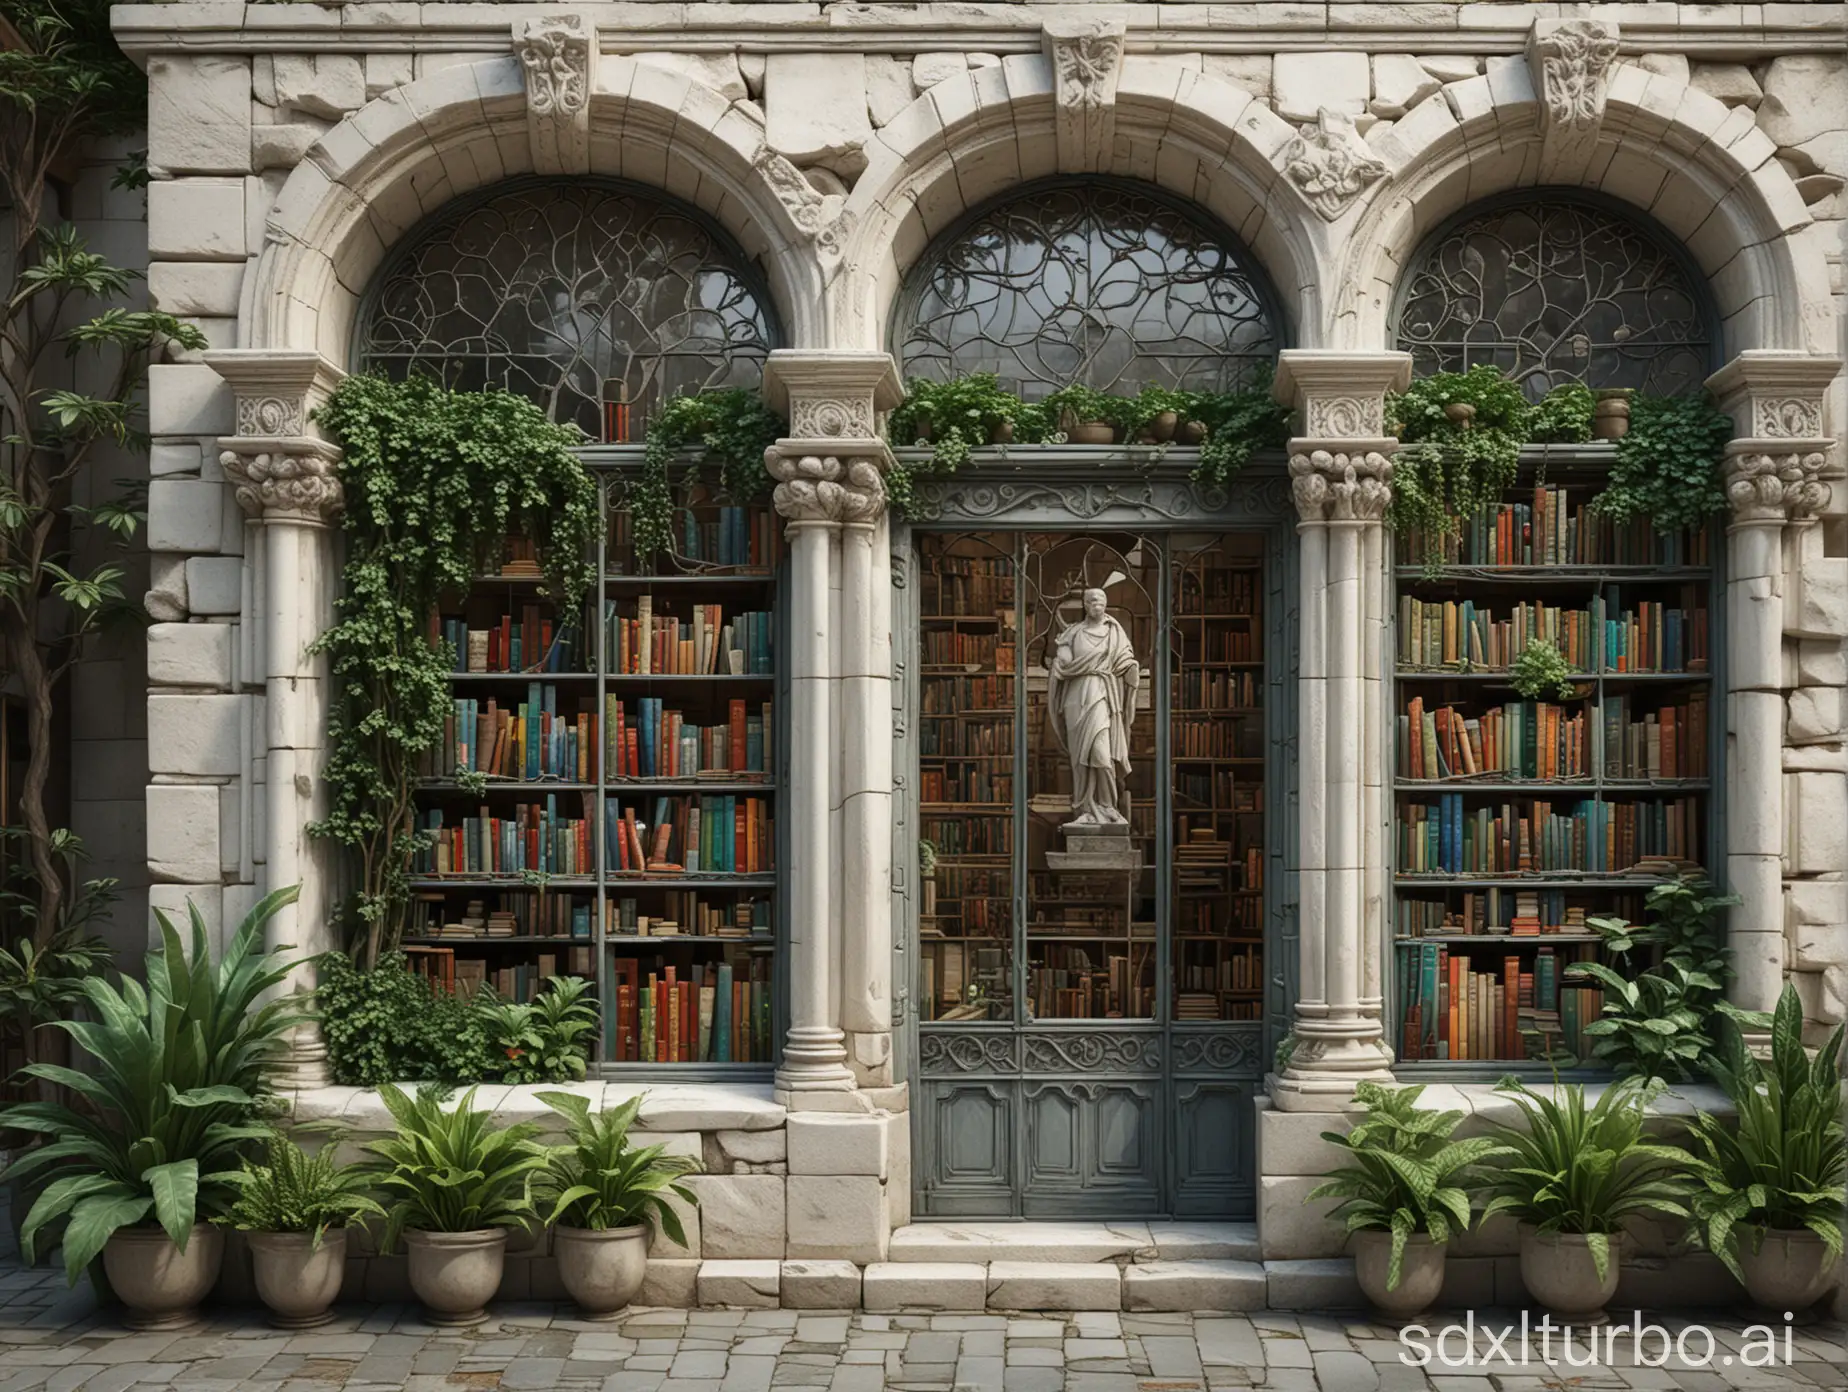 A vast white stone bookshop with green plants and sculptures : 1. | colorful stained glass and in the back : .9 | clear,bright atmosphere : 1. | highly detailed,high precision,focus on textures, hyperrealistic,bright : 1.